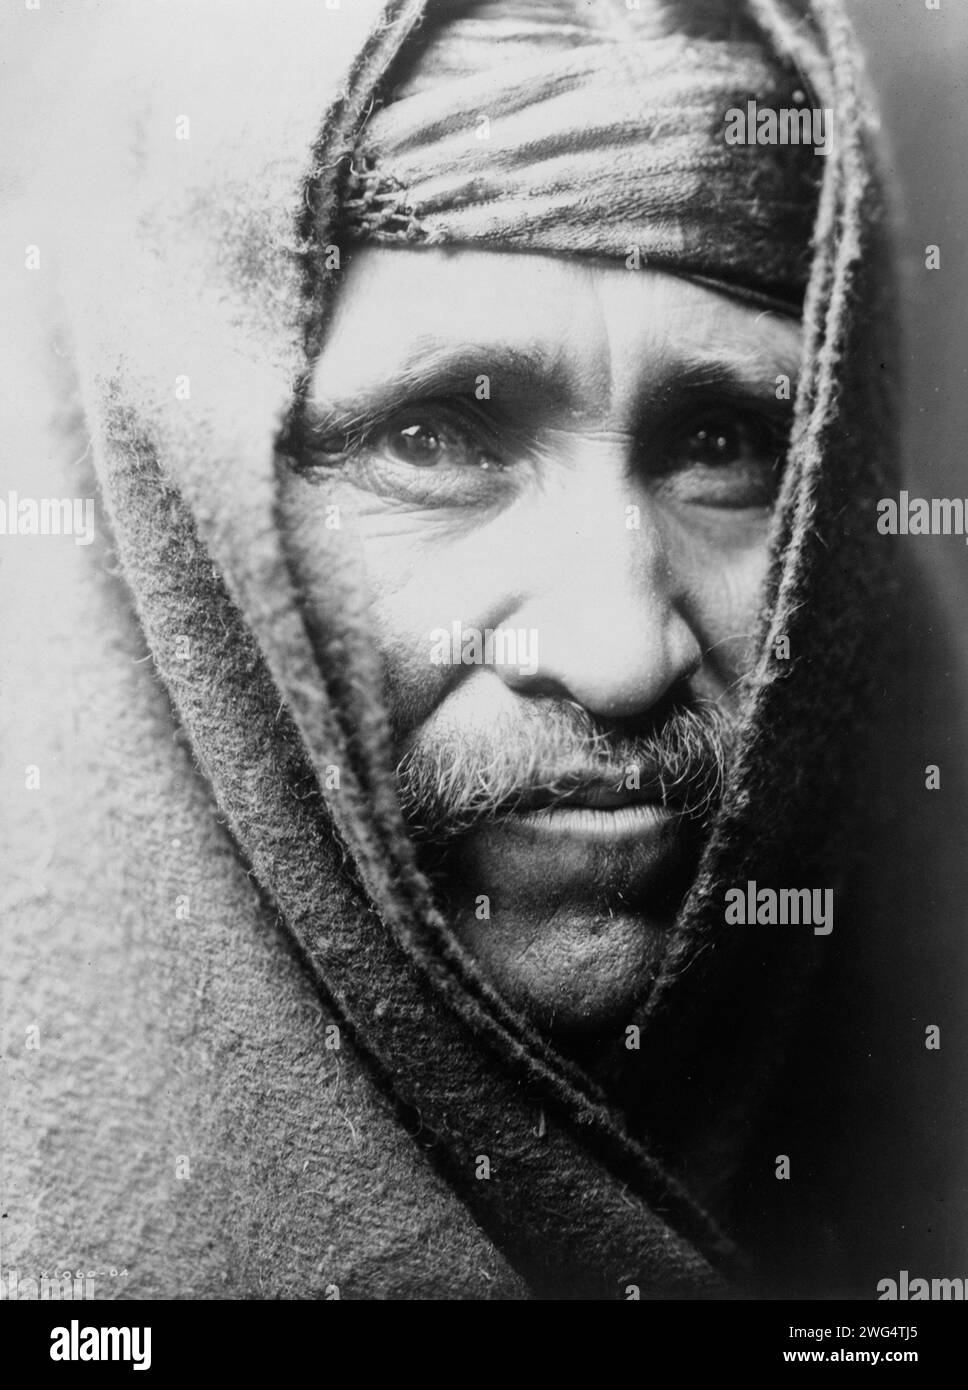 The Chanter, c1905. Head-and-shoulders portrait of Navajo Indian, wrapped in blanket. Stock Photo